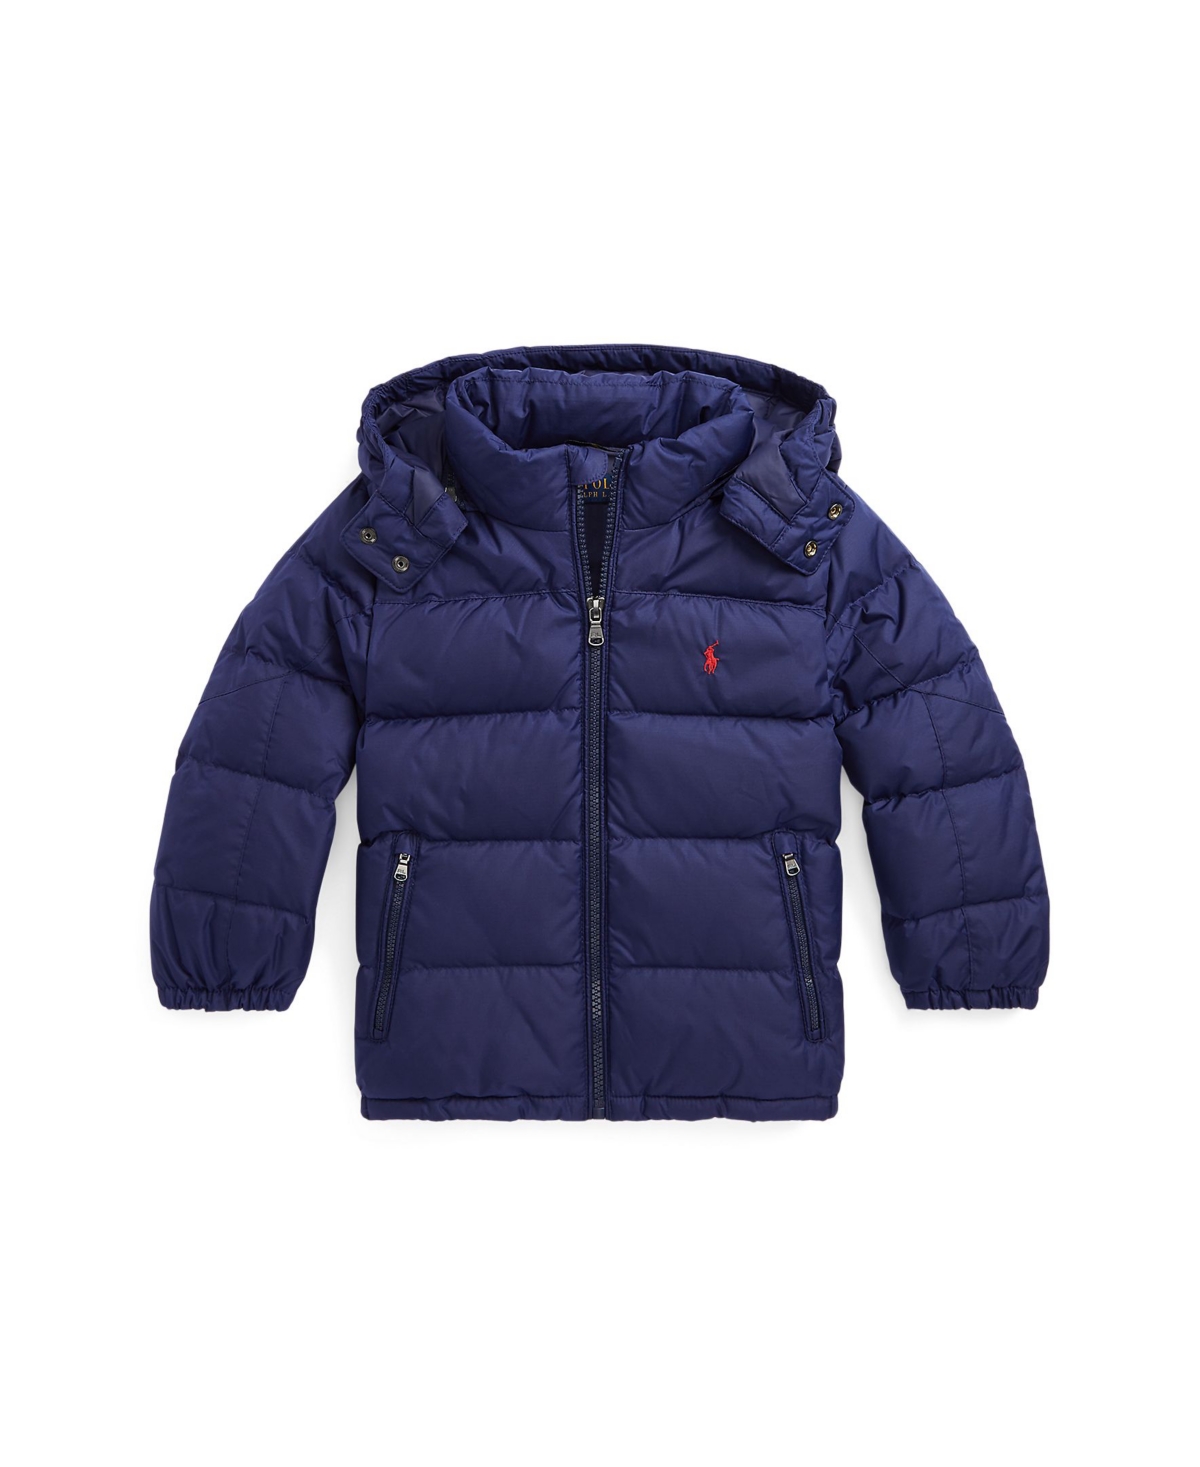 POLO RALPH LAUREN LITTLE AND TODDLER BOYS WATER-RESISTANT DOWN JACKET